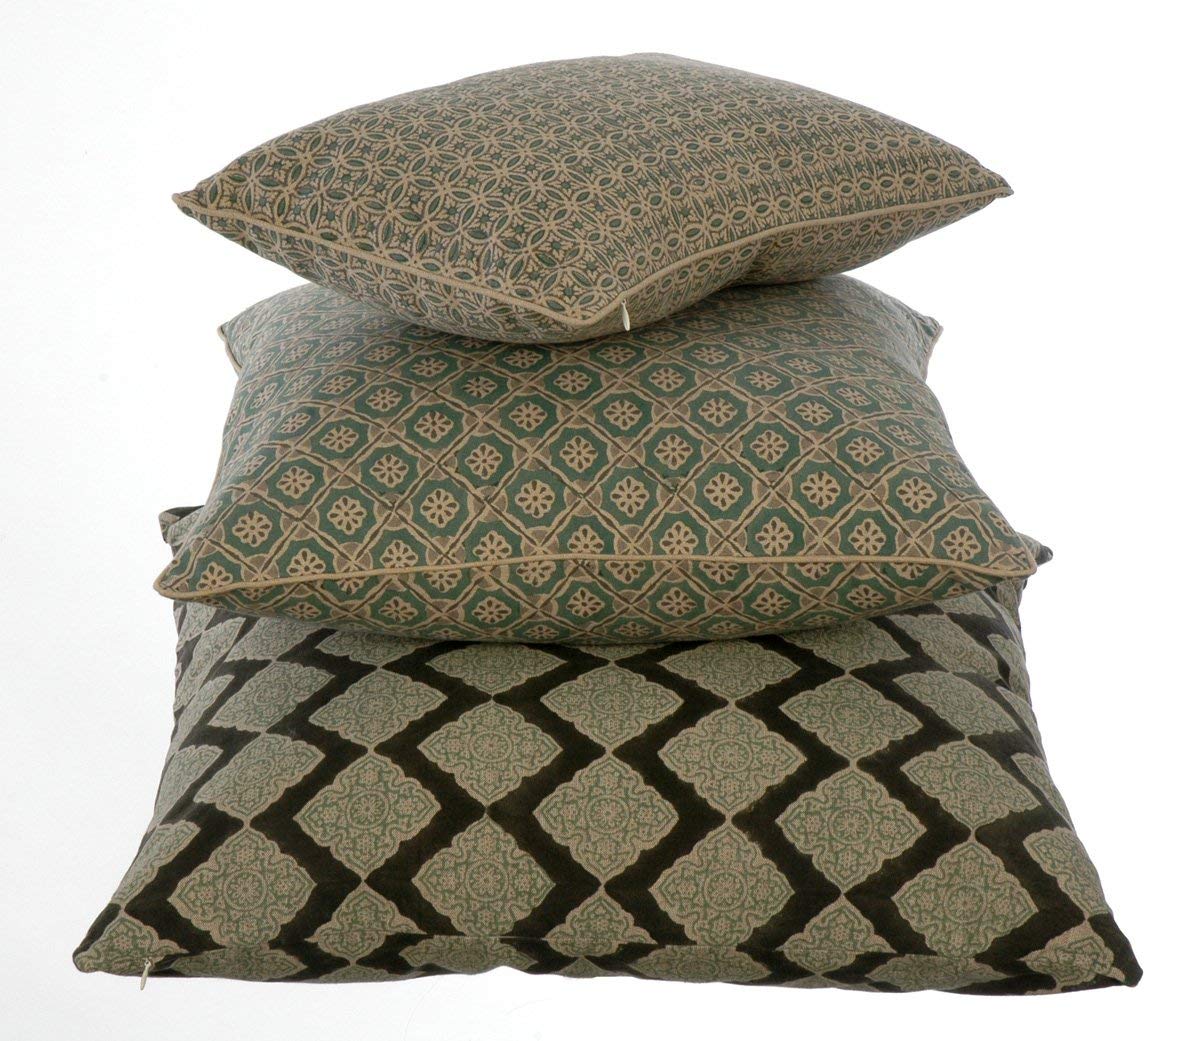 Potager Collection Cotton Cushion in Green Mix Maze 60x60 Hand Block Printed